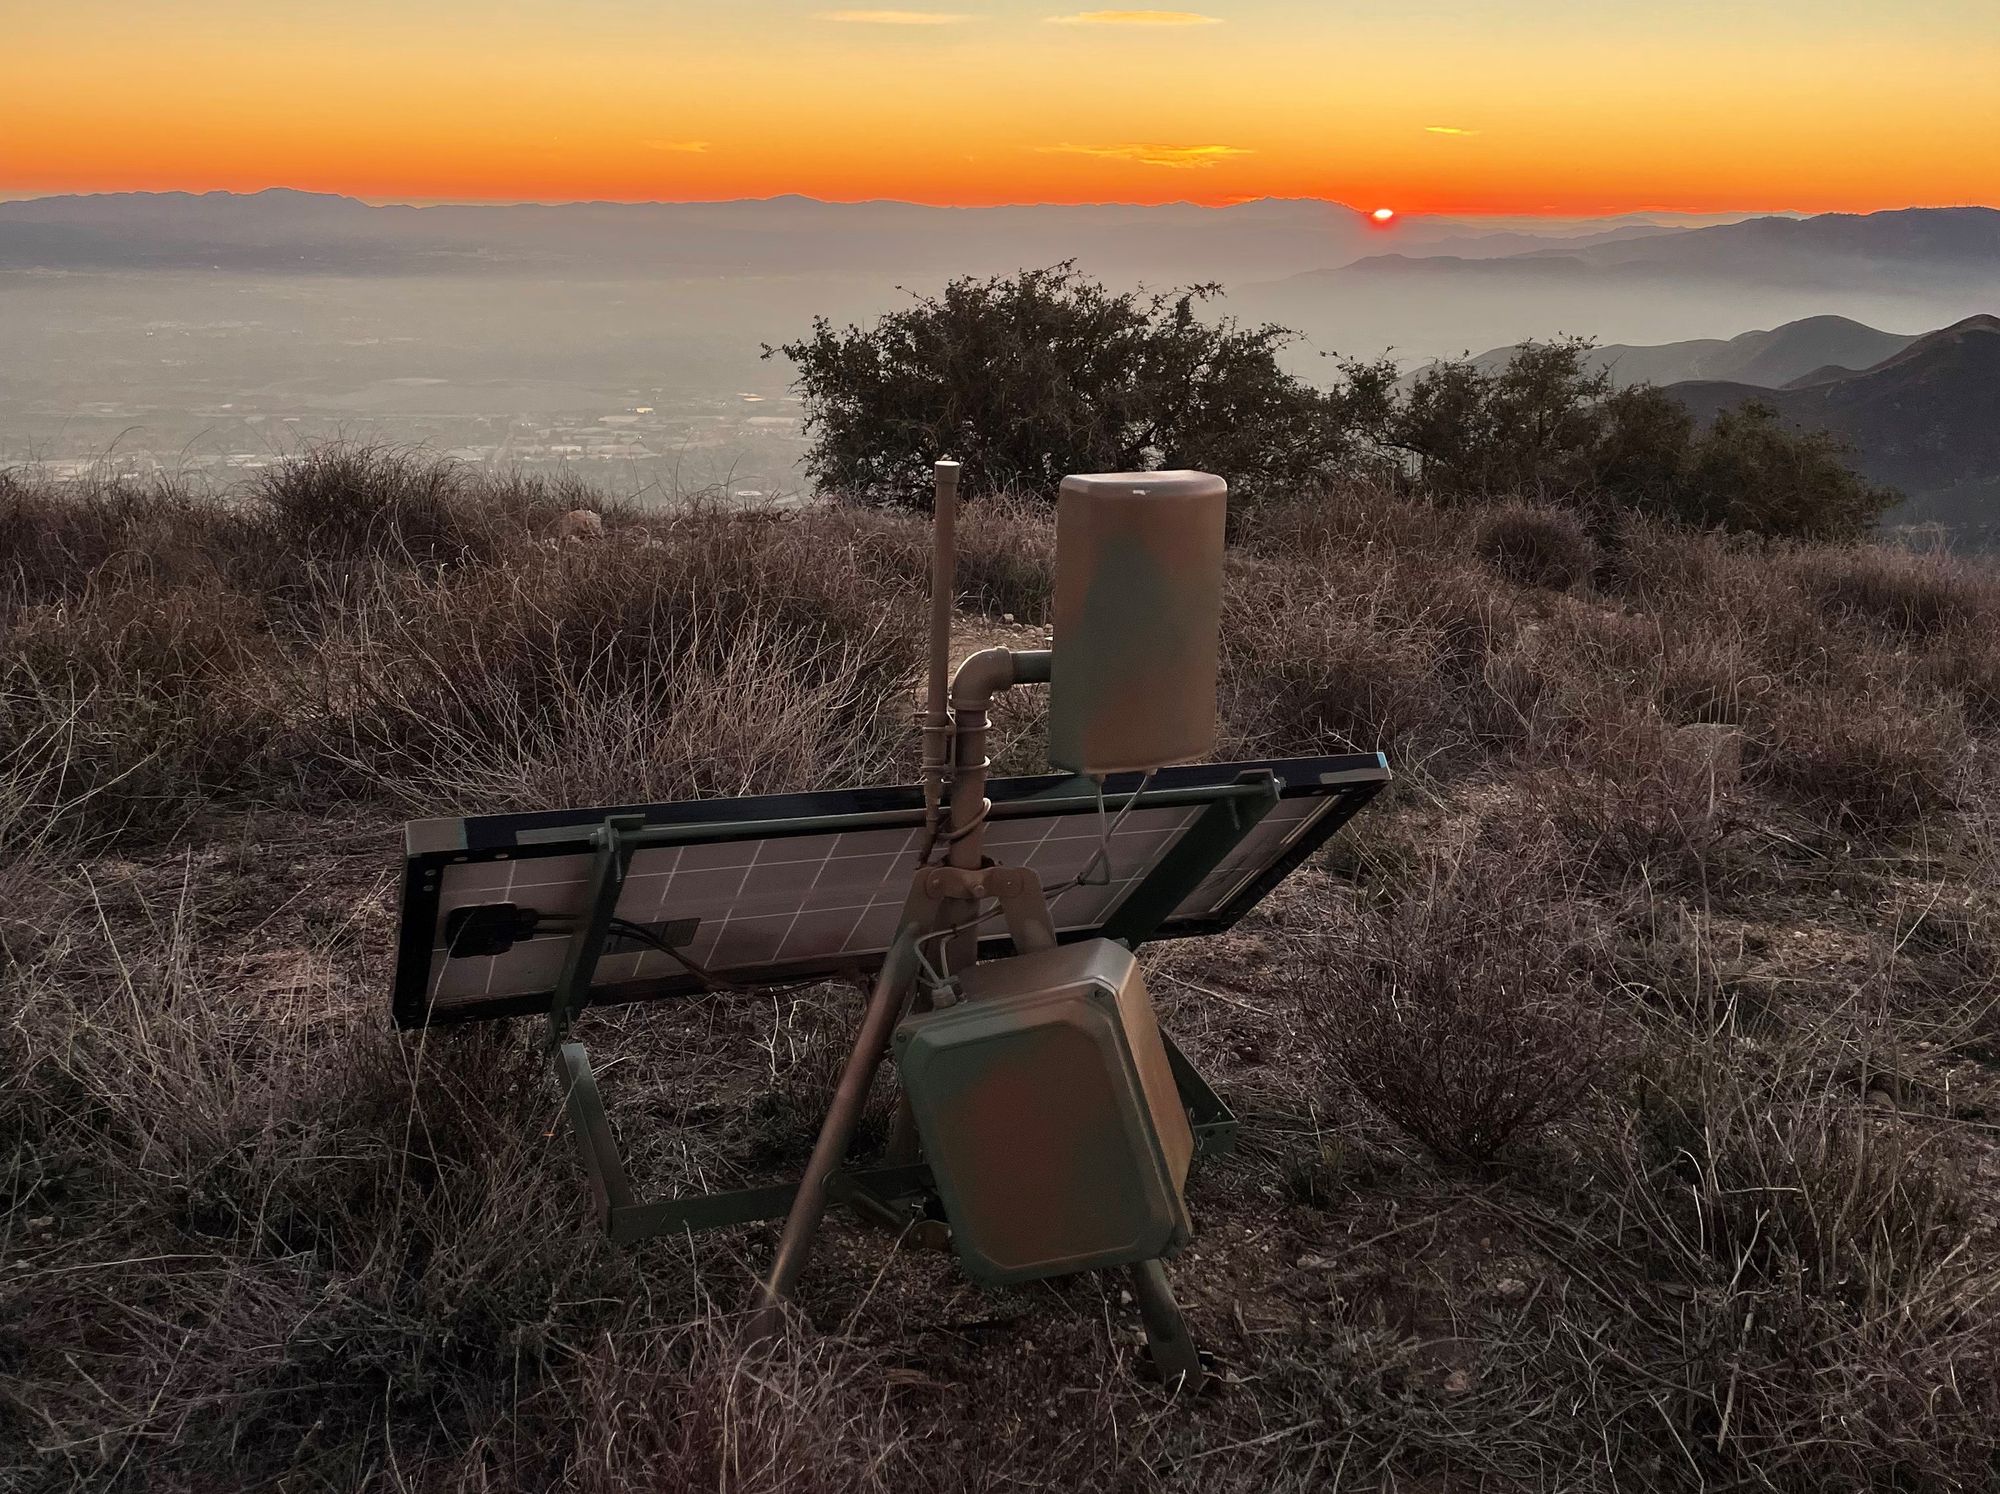 The fourth and final version of the Helium Network Station. This specific station is fitted with an additional high-gain cellular antenna to improve signal strength and spray-painted camouflage to deter hikers and explorers who get too hands-on with the station.